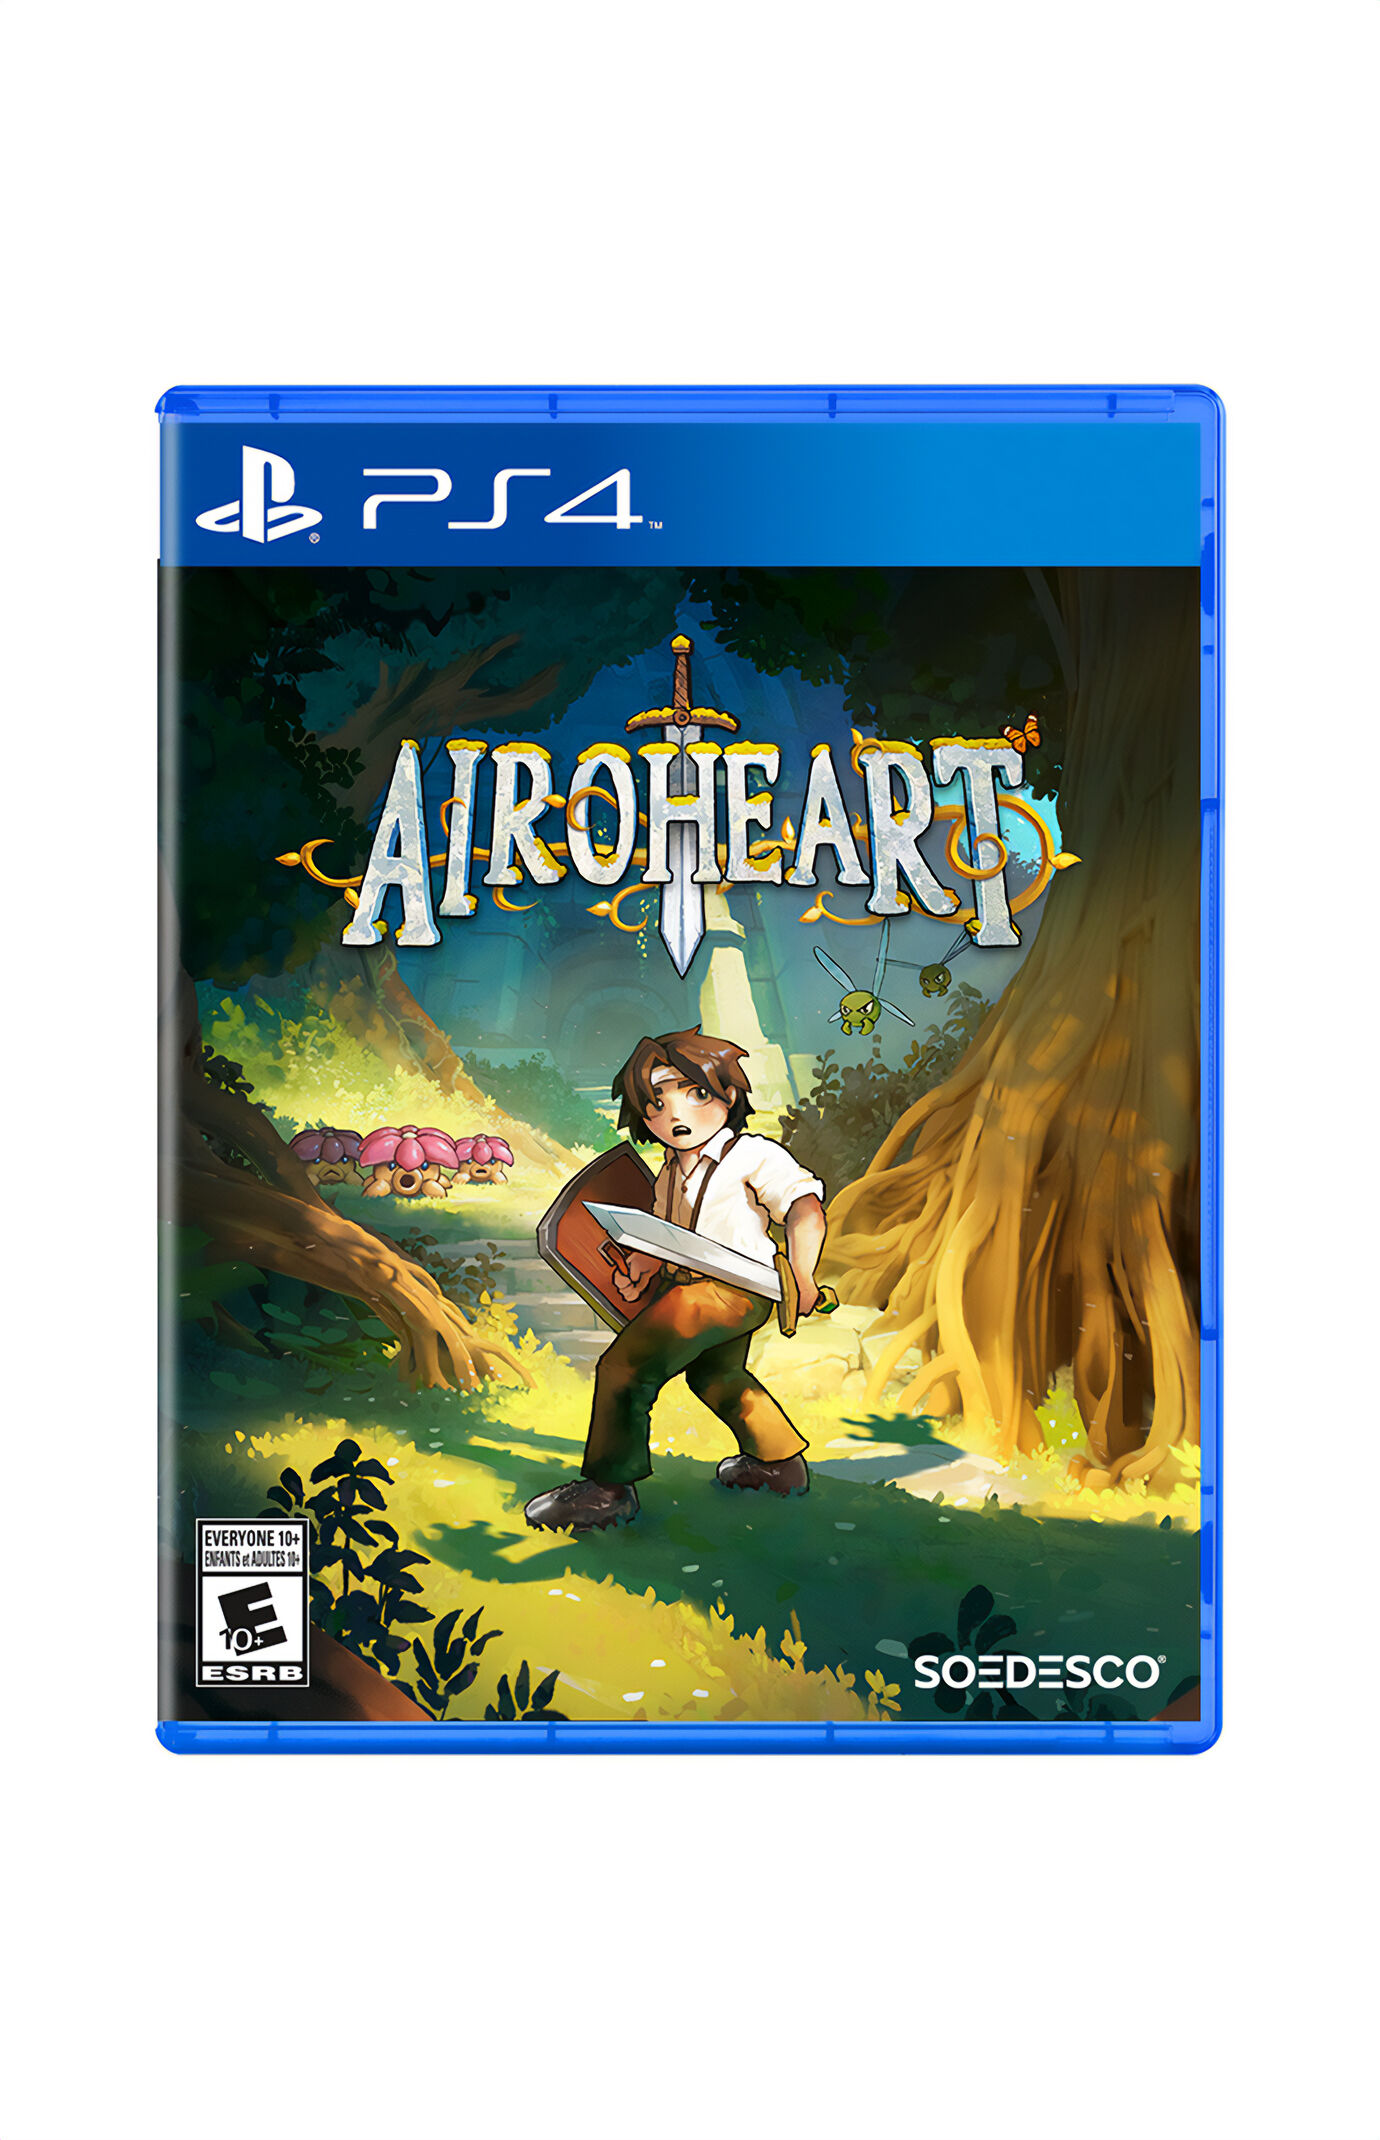 download Airoheart